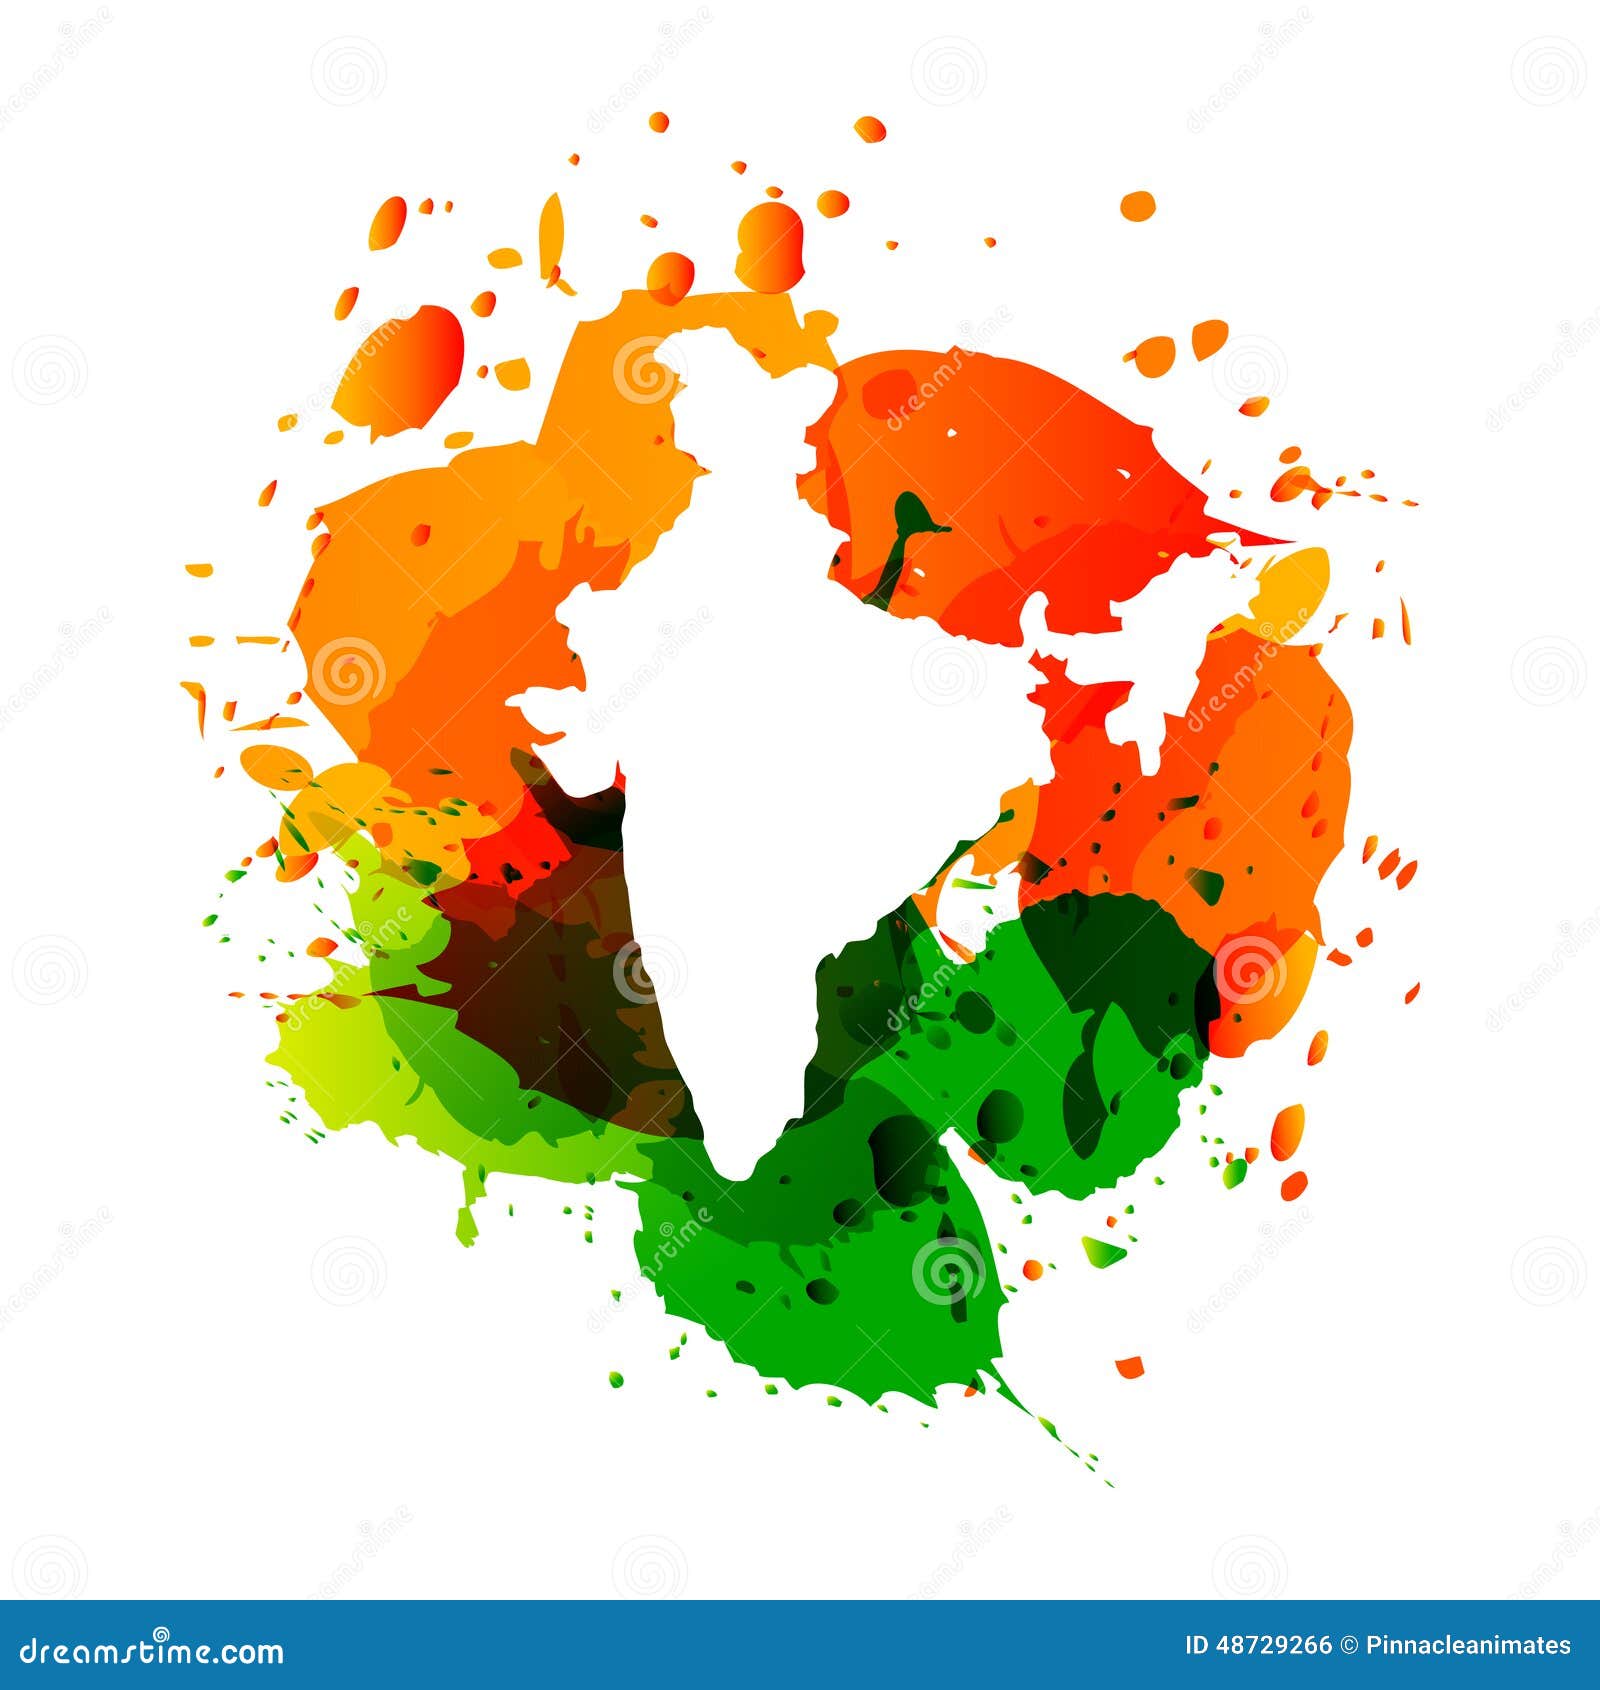 india map clipart vector - photo #22